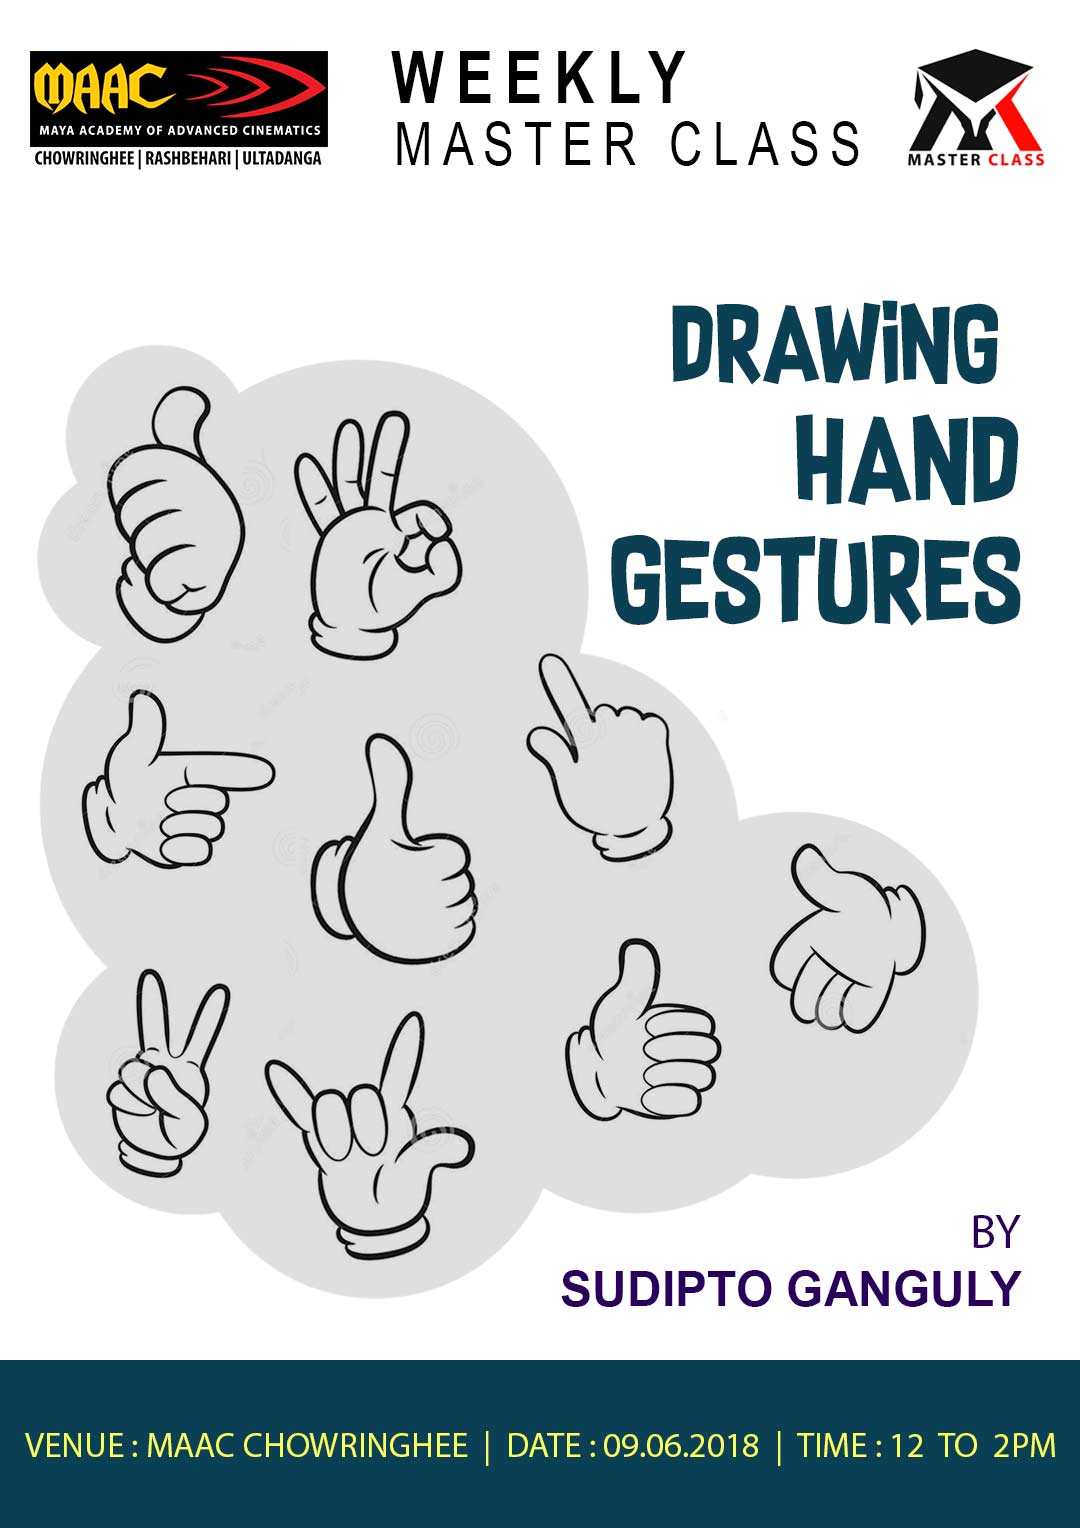 Weekly Master Class on Drawing Hand Gestures